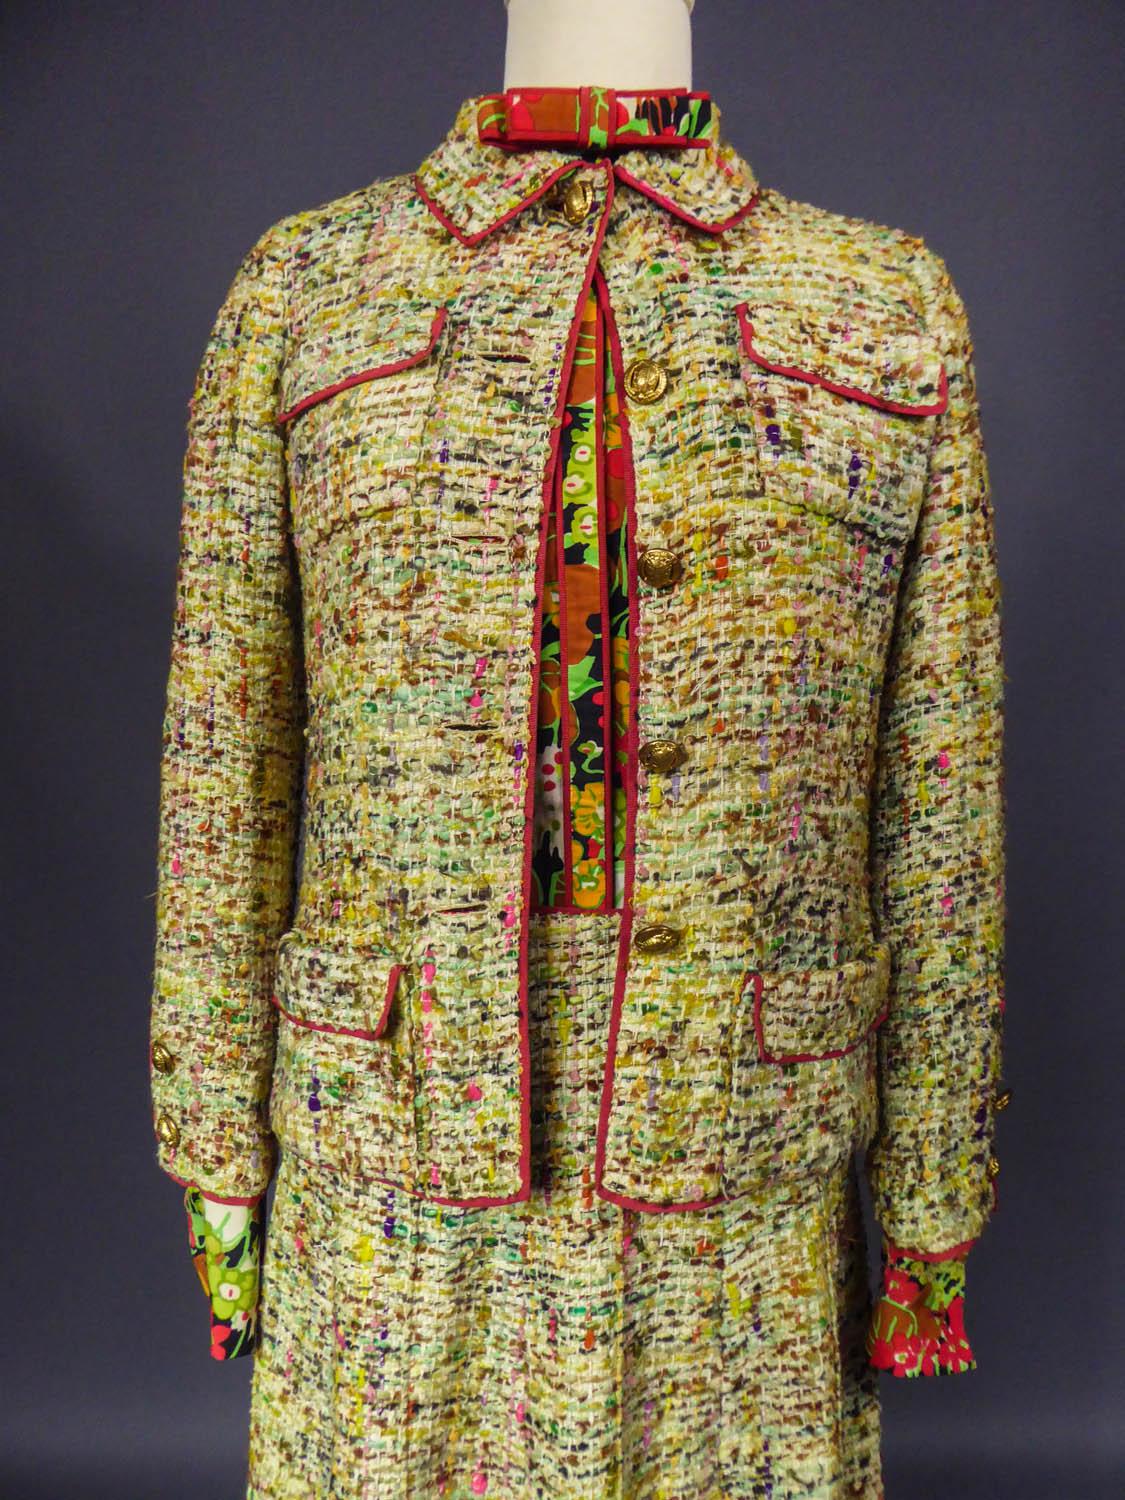 Circa 1968/1971
France

Famous and amazing Haute Couture skirt and blouse suit by Gabrielle Chanel dating from the last years of the famous icon of French fashion before 1971. Skirt and jacket in flecked wool tweed in shades of beige, yellow, green,